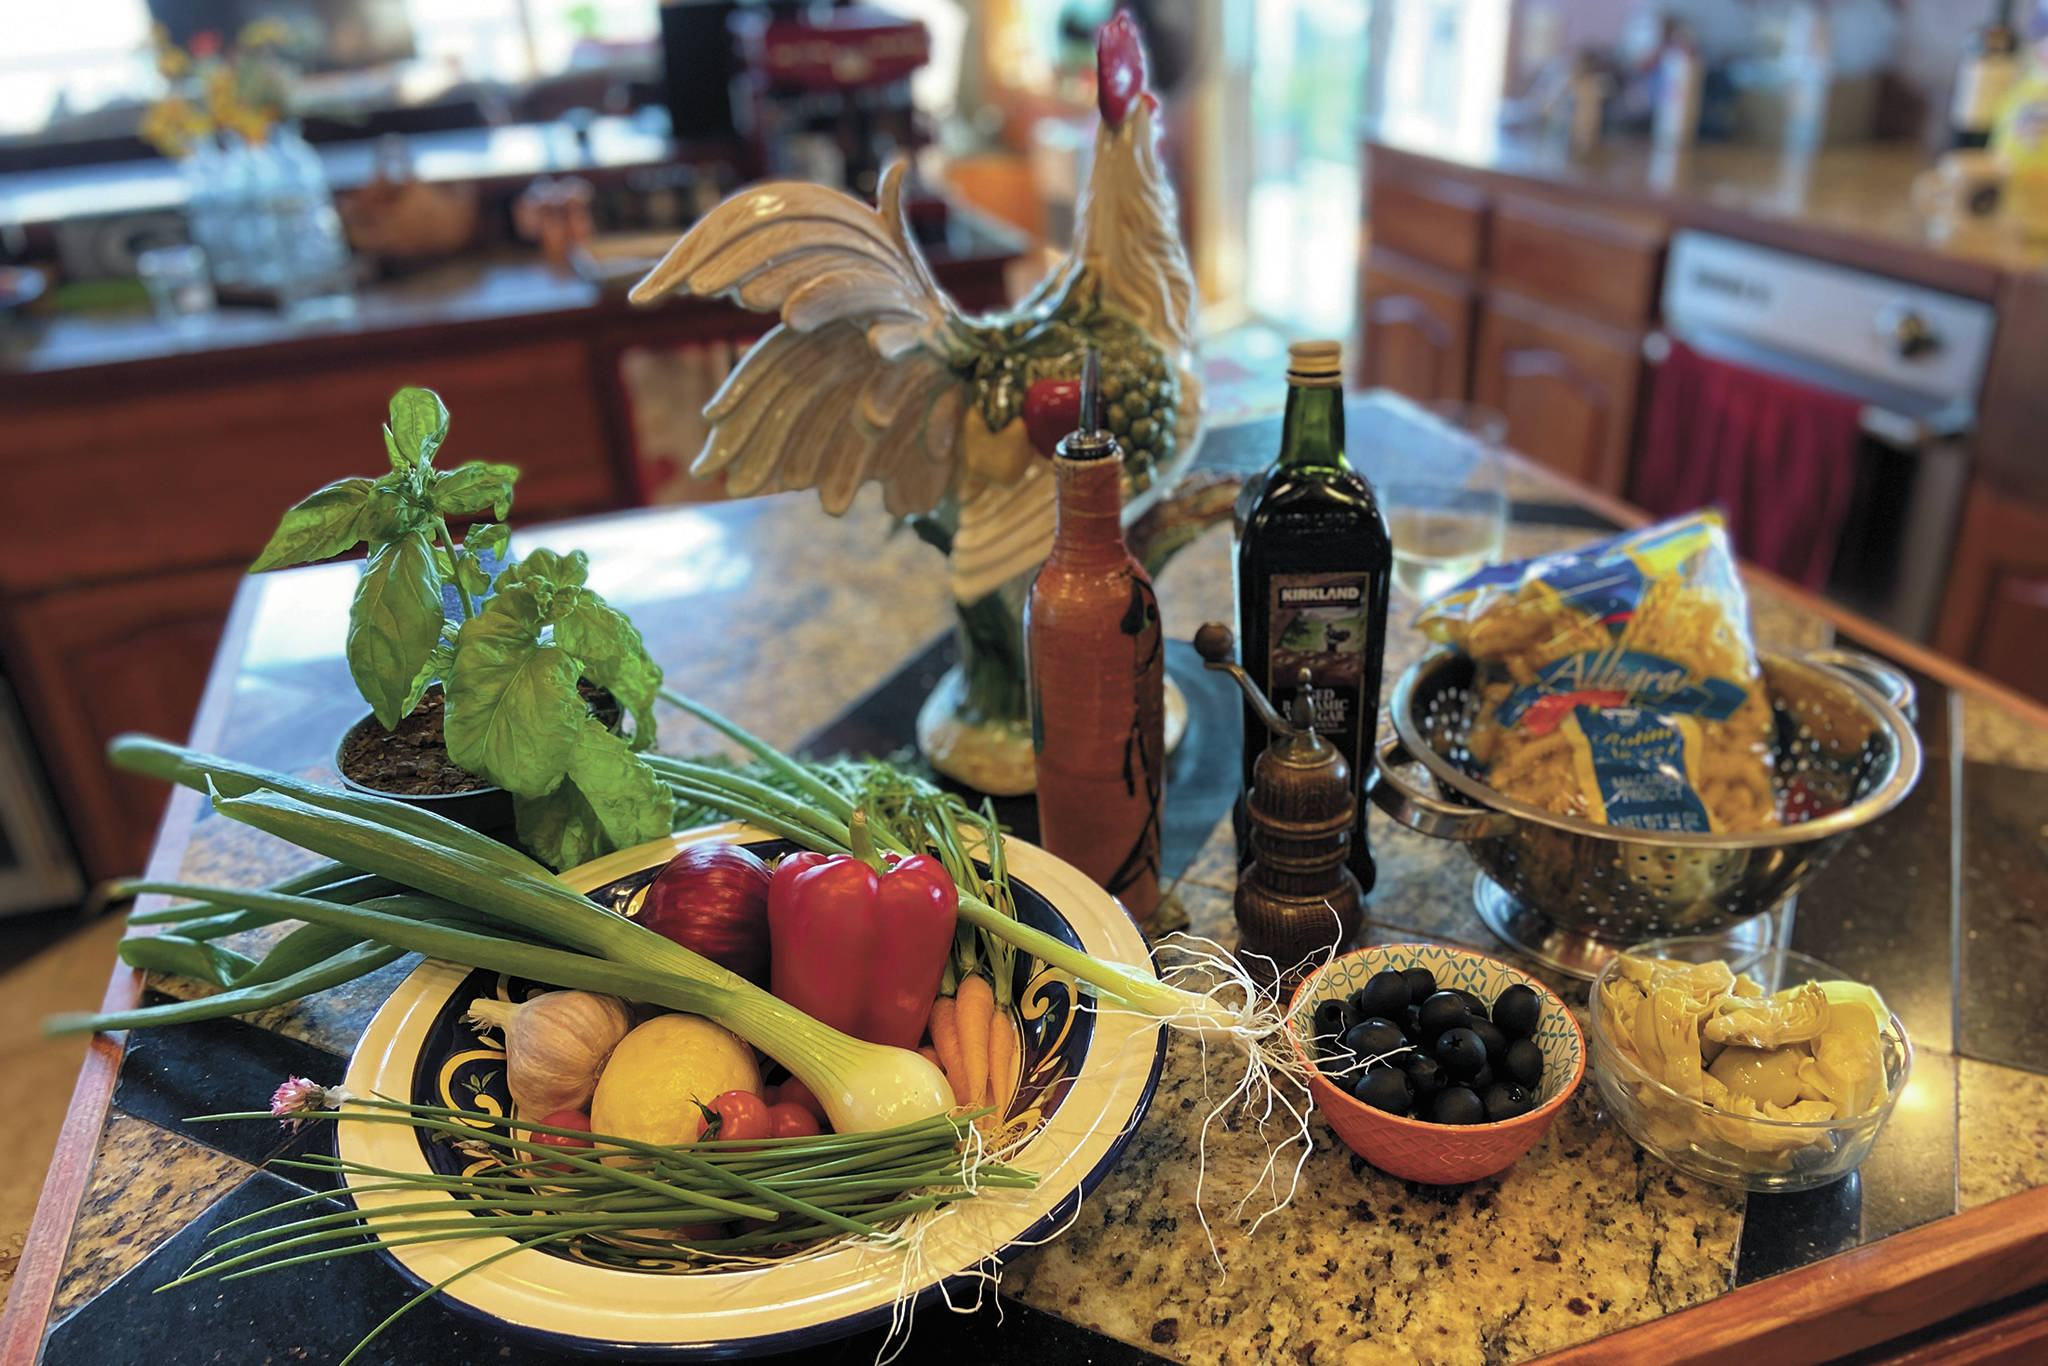 Fixings for a pasta salad sit ready in Teri Robl’s Homer, Alaska kitchen. (Photo by Teri Robl)